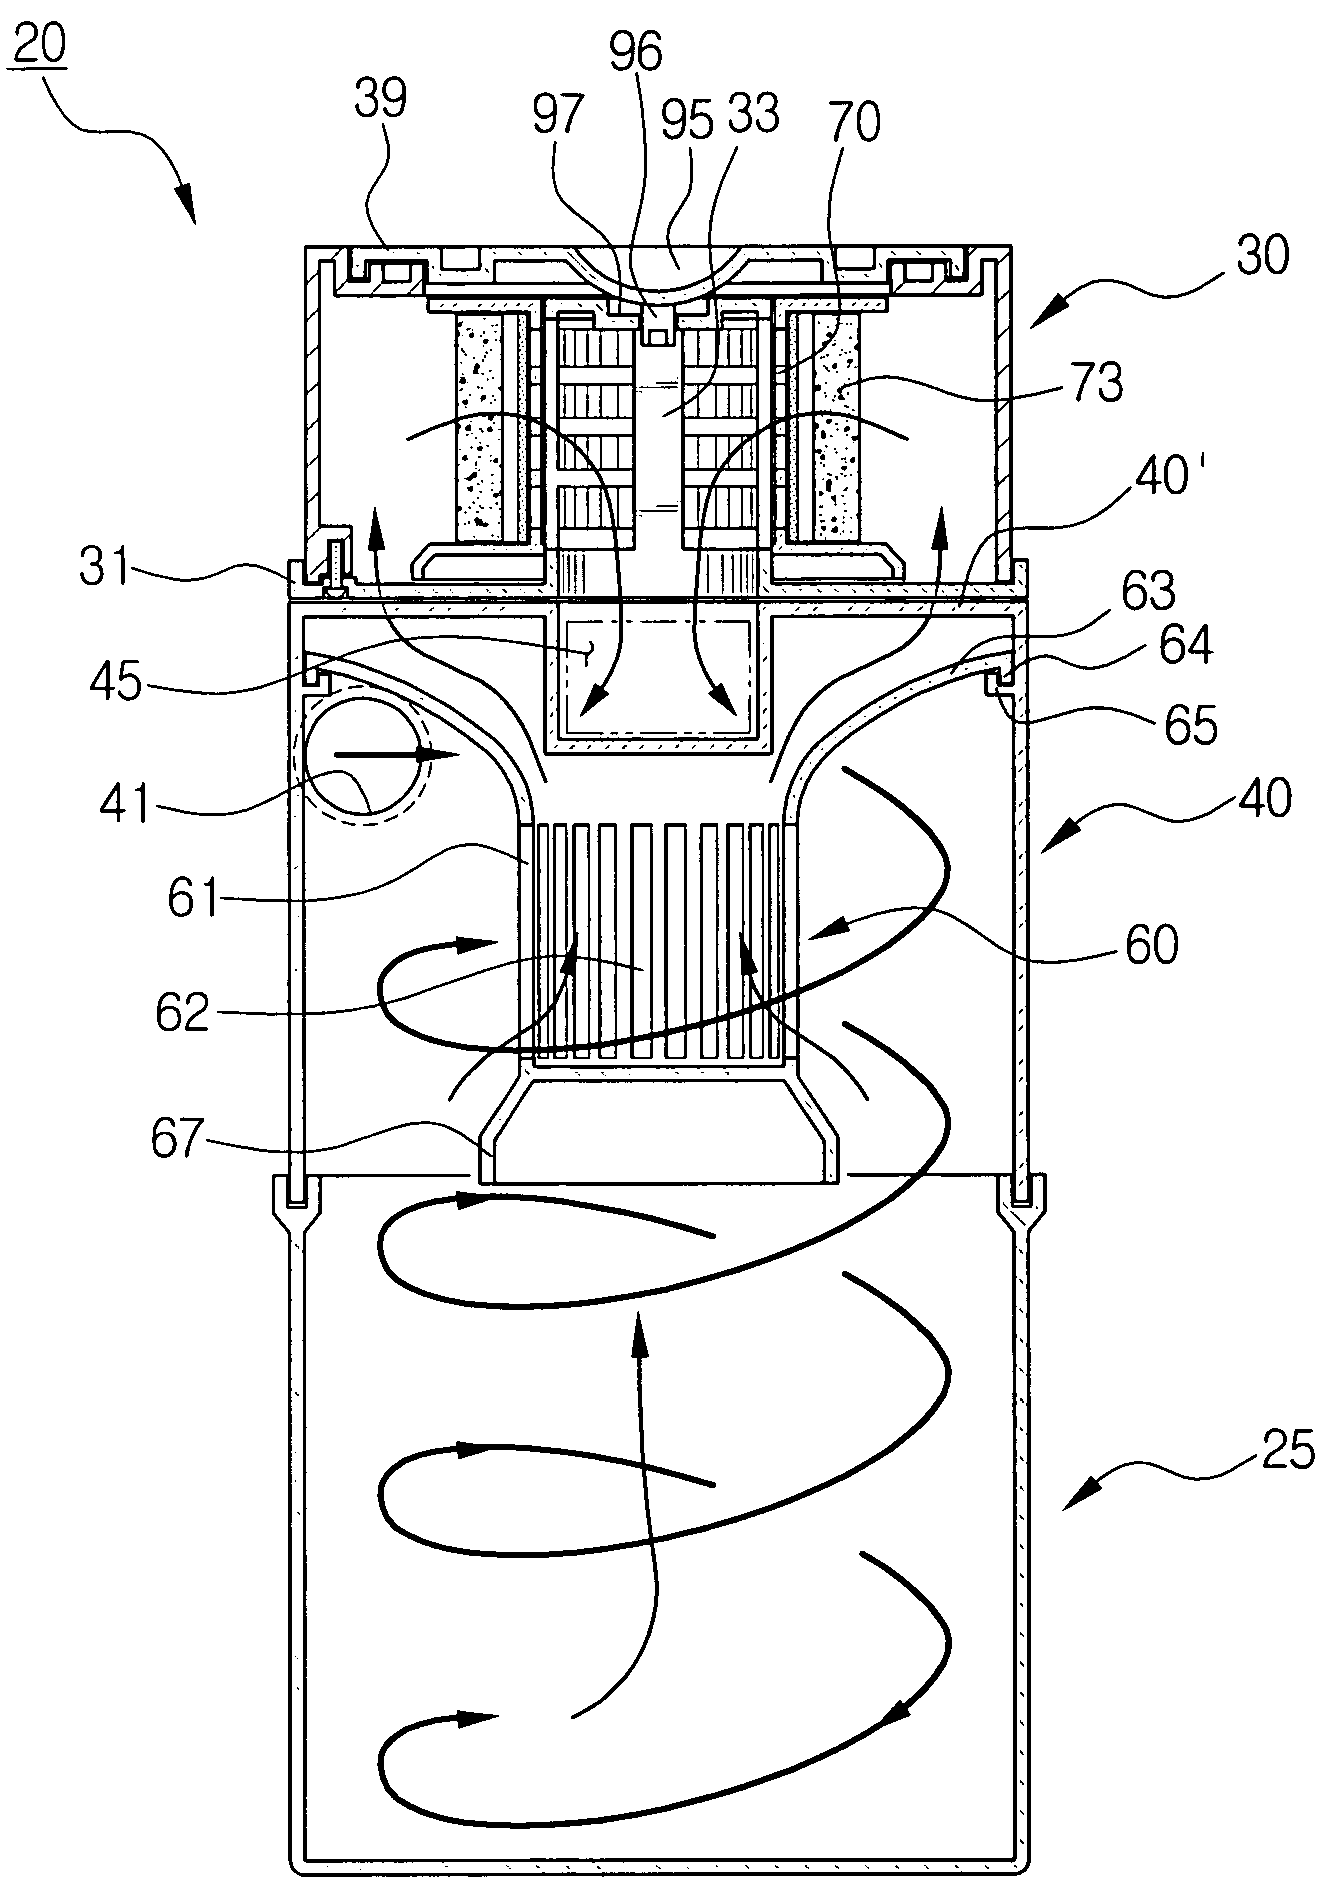 Cyclone dust collecting apparatus of vacuum cleaner